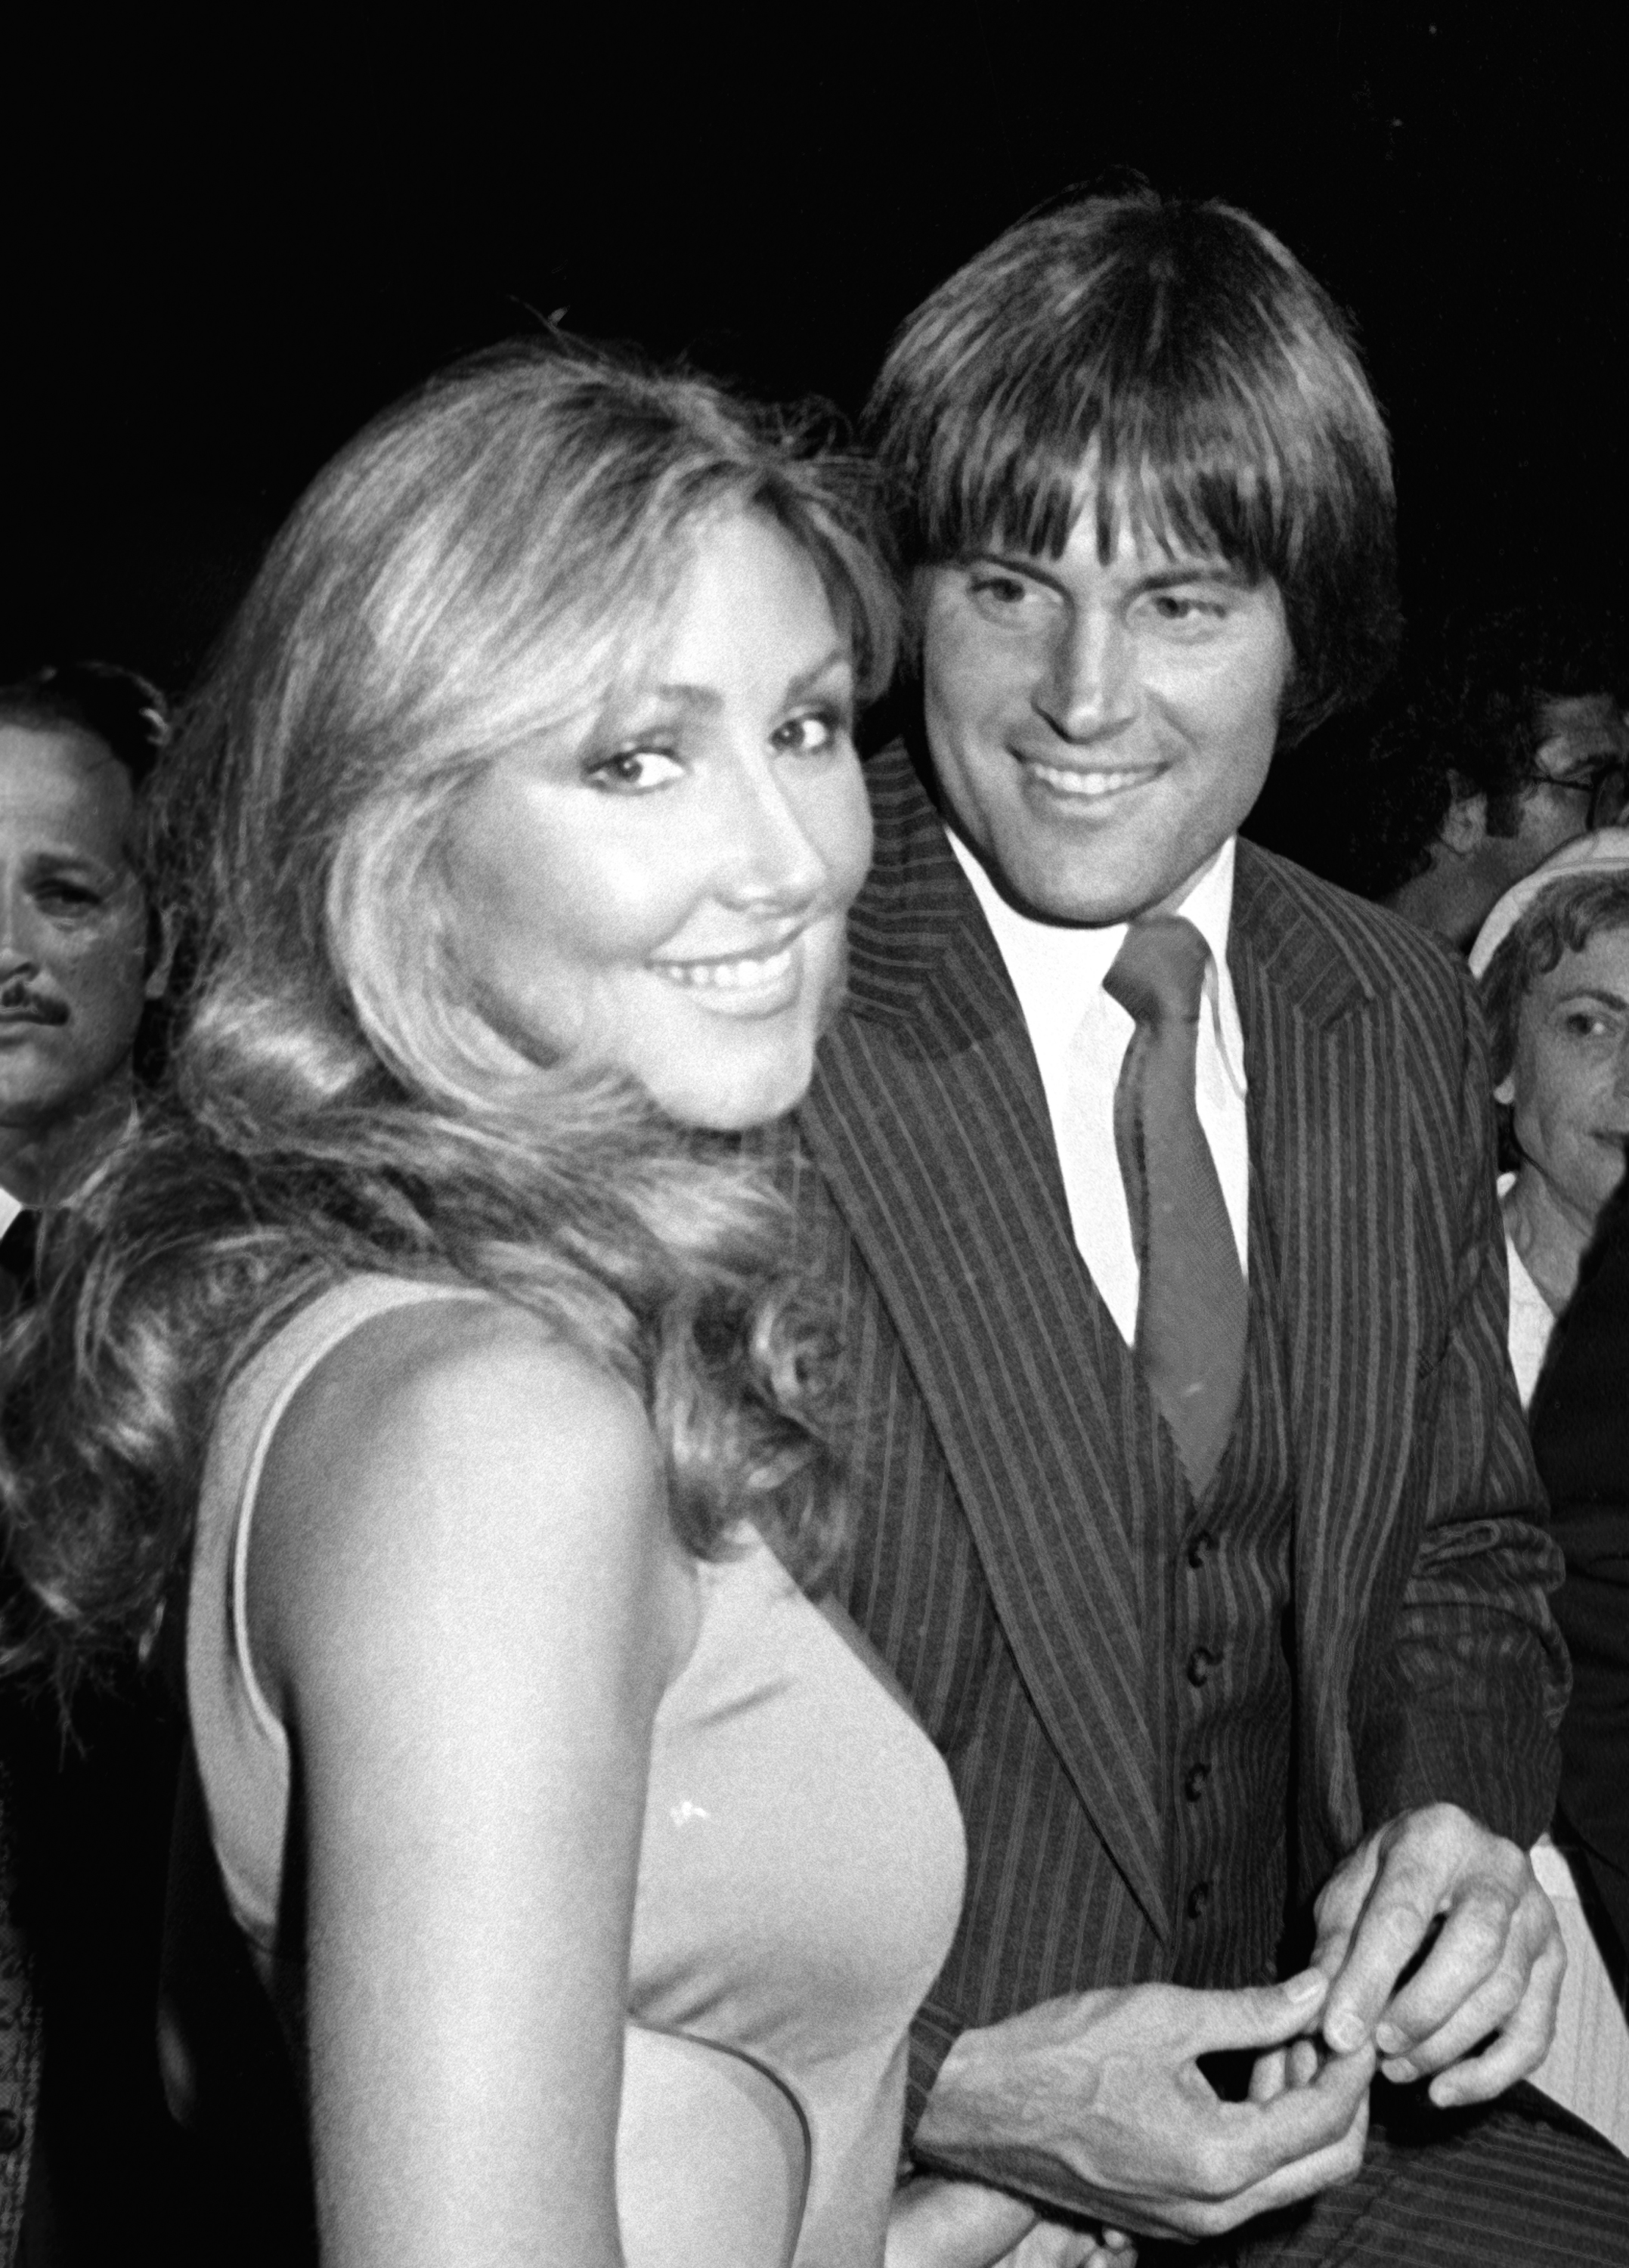 Linda Thompson and Bruce Jenner (before transitioning) at the premiere party for "Can't Stop The Music" in New York City, 1980 | Source: Getty Images